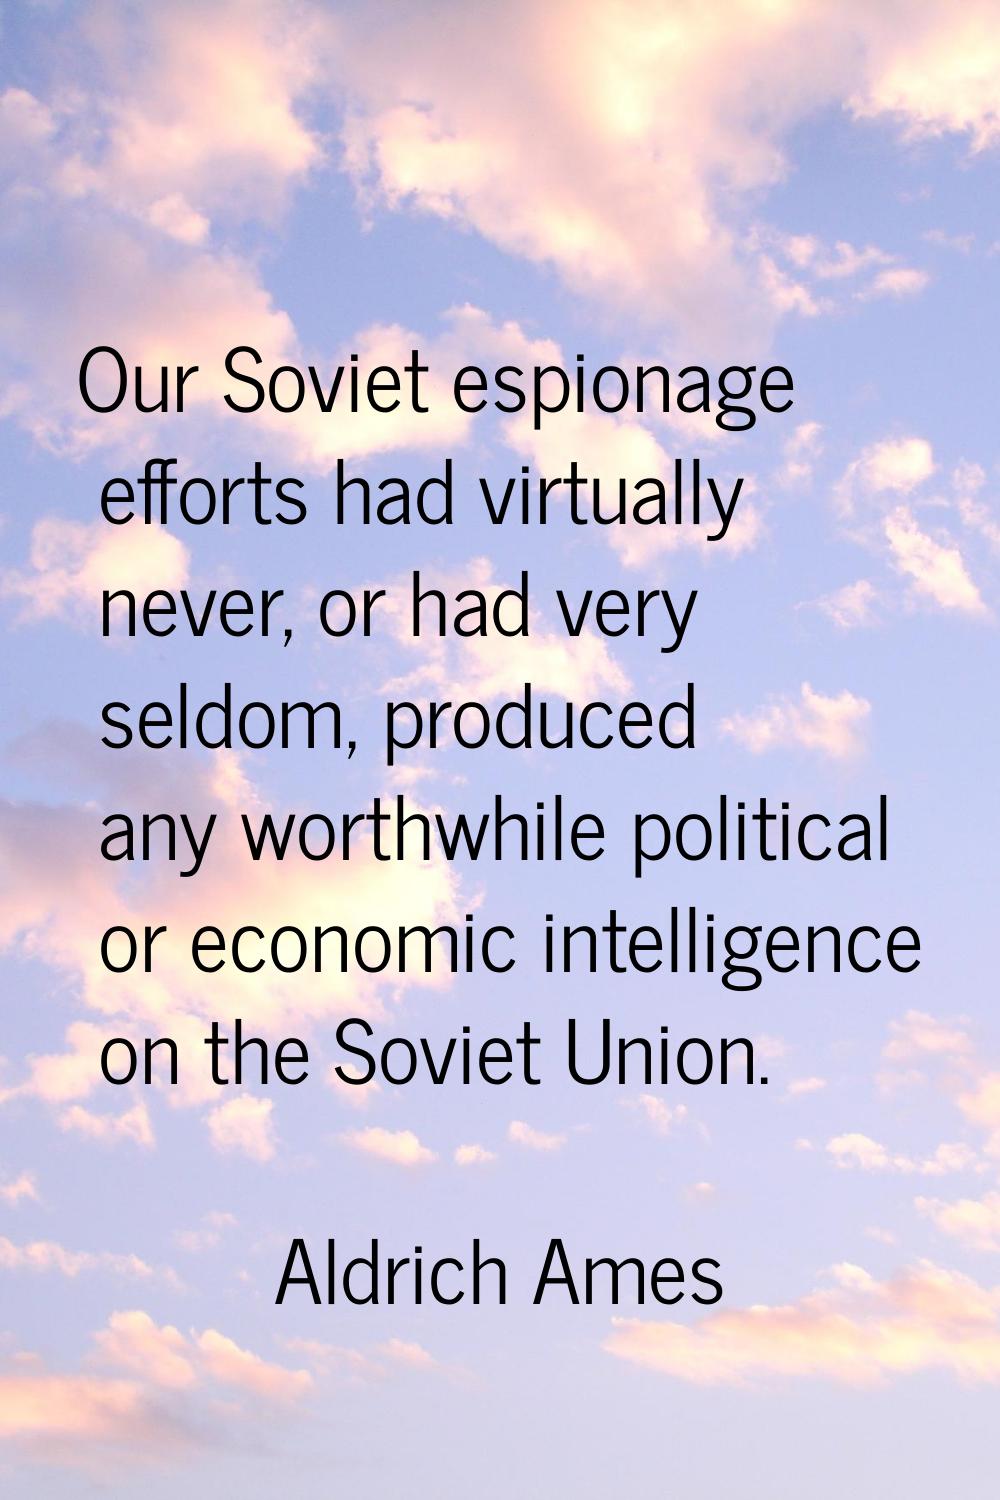 Our Soviet espionage efforts had virtually never, or had very seldom, produced any worthwhile polit